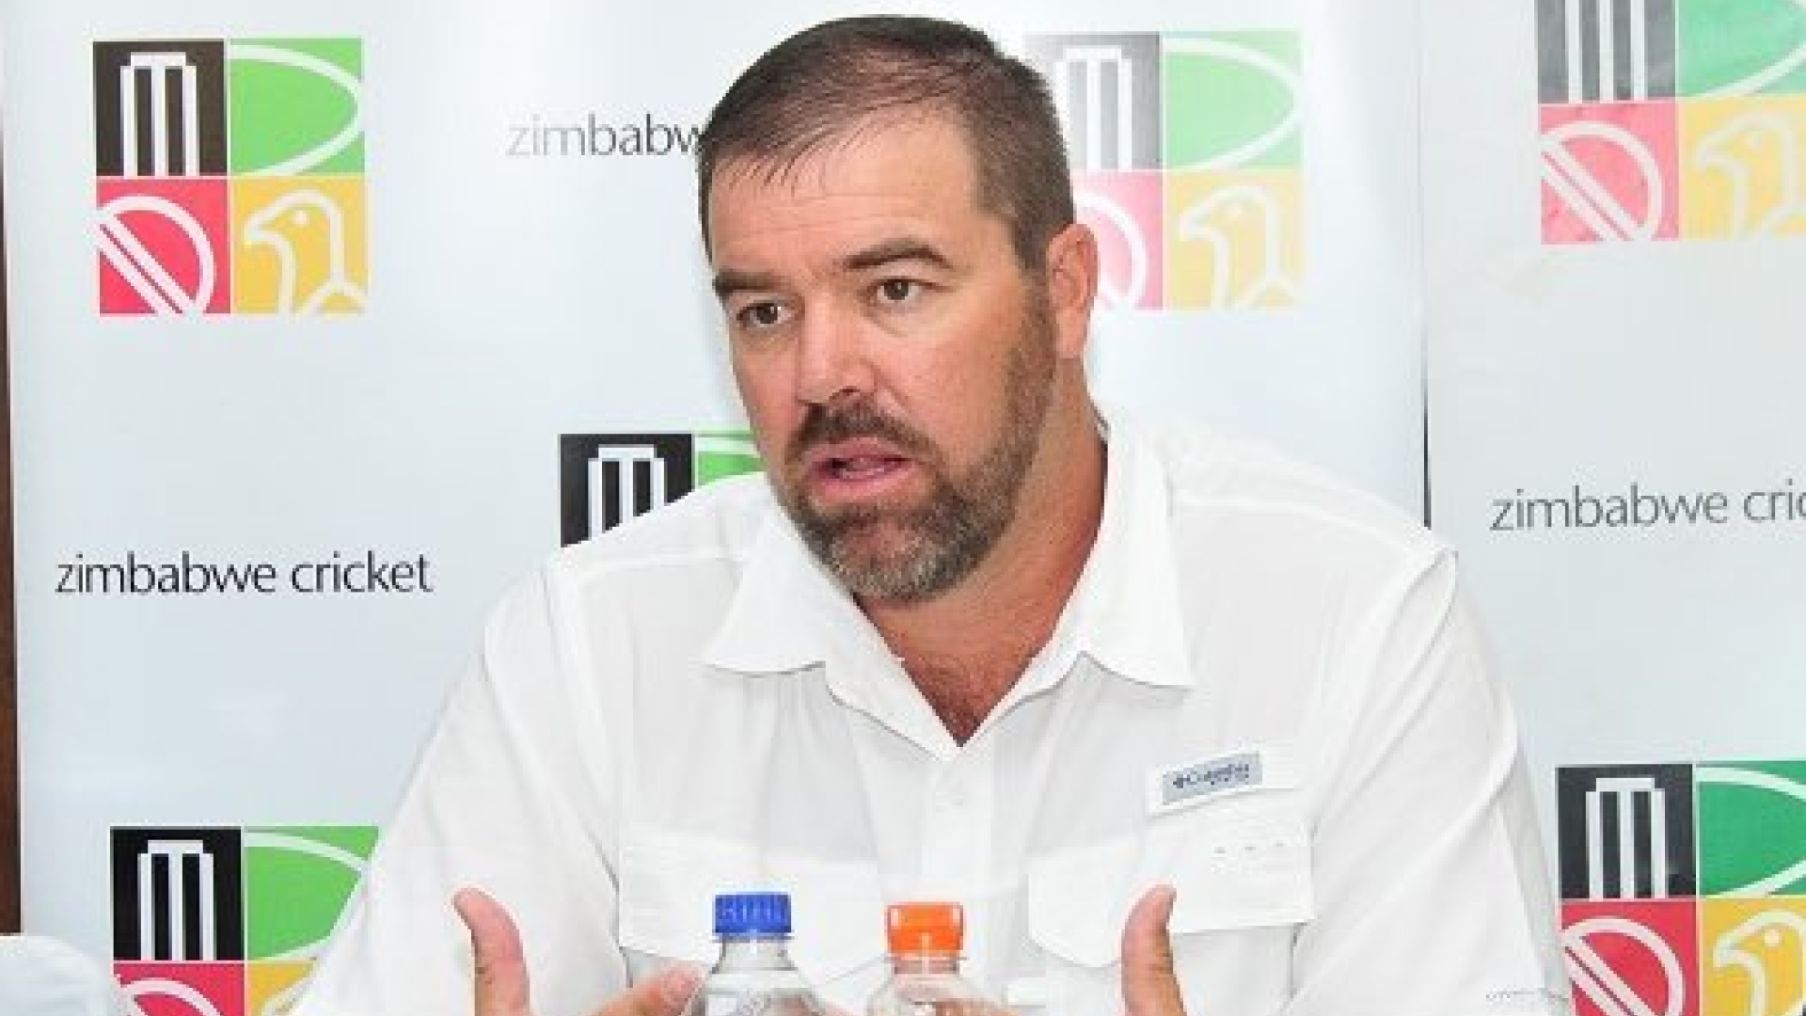 Heath Streak says he is not a fixer but accepts ICC’s eight-year ban 